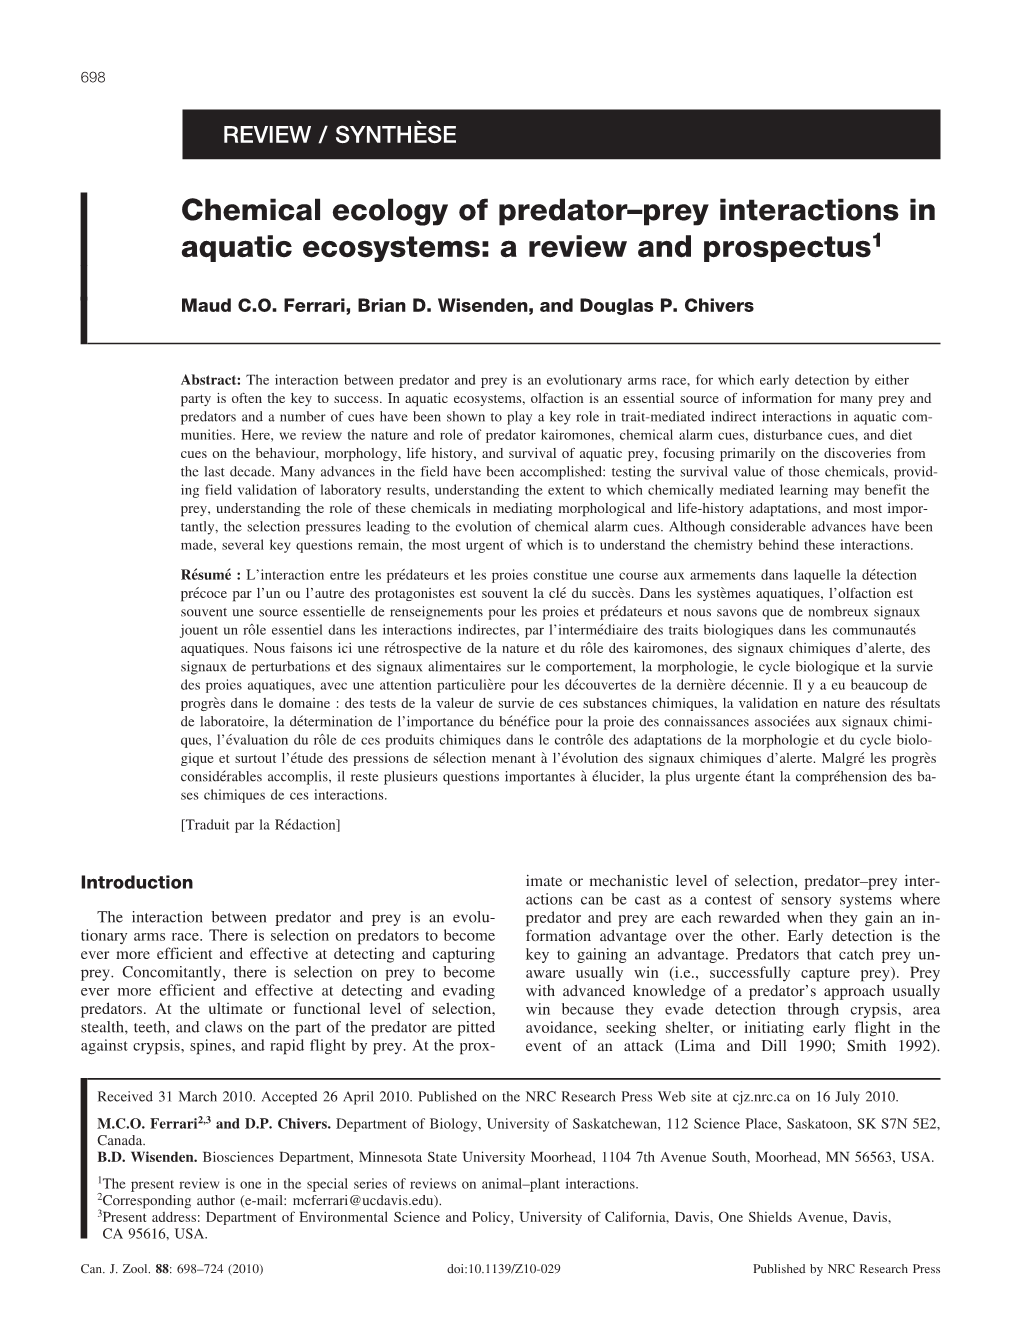 Chemical Ecology of Predator–Prey Interactions in Aquatic Ecosystems: a Review and Prospectus1